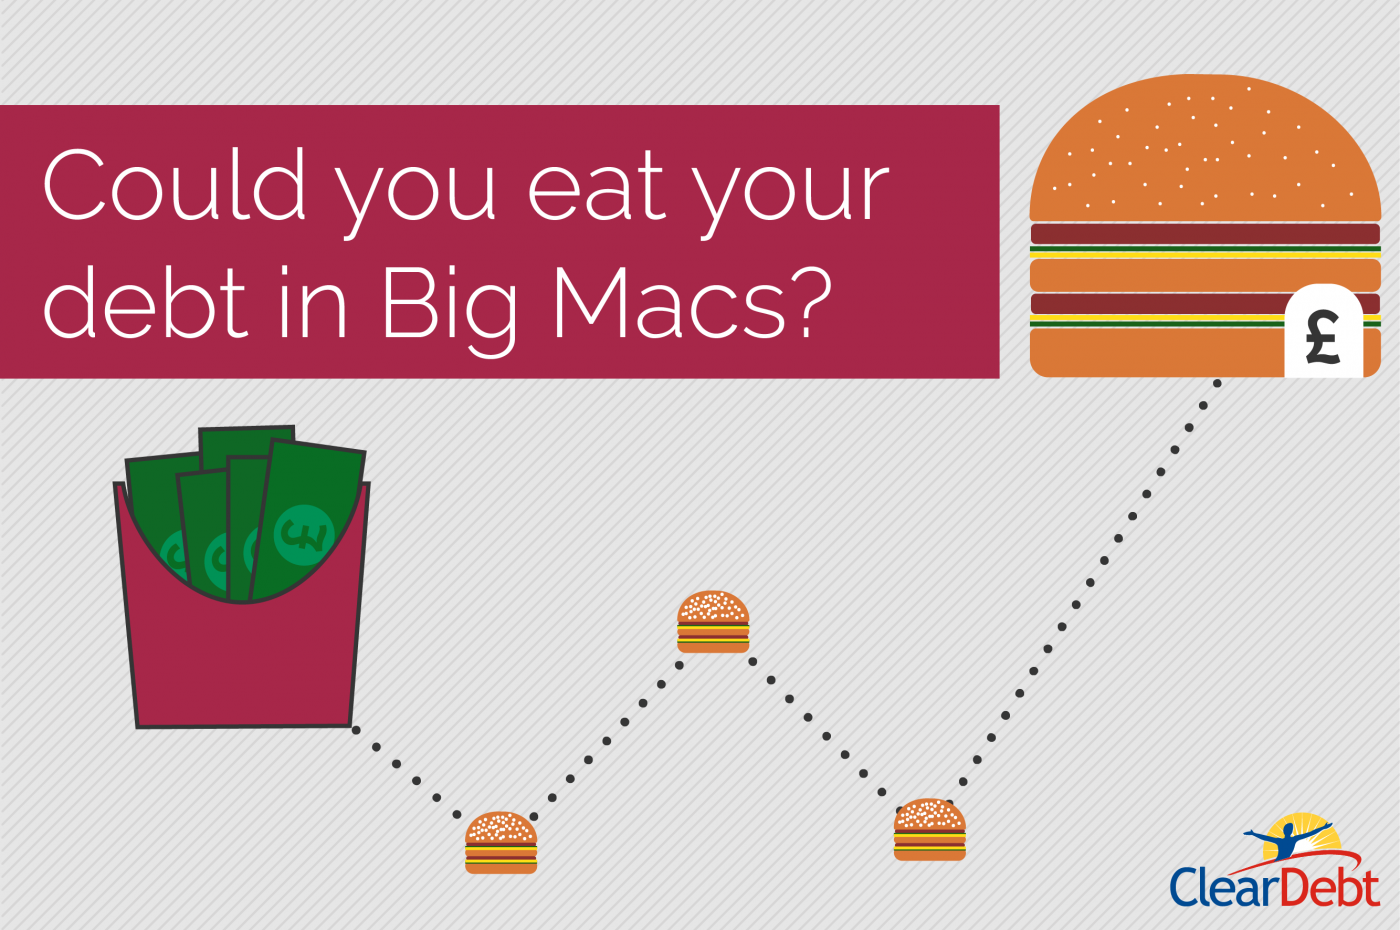 Could you eat your debt in Big Macs? - ClearDebt